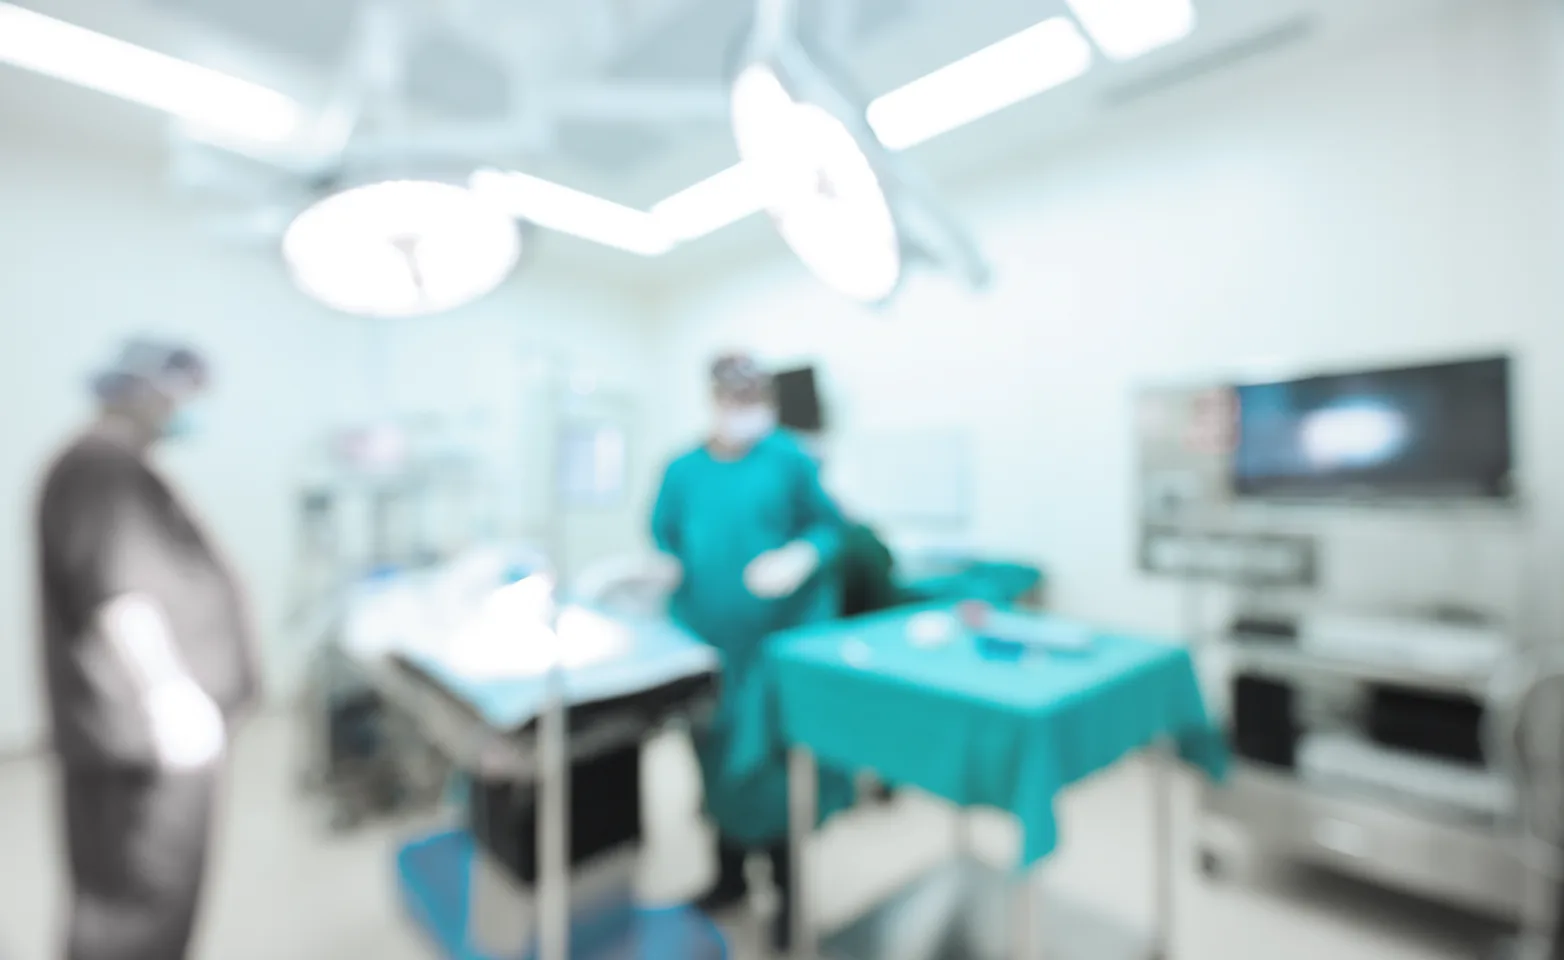 Blurry image of doctors standing in a surgery room